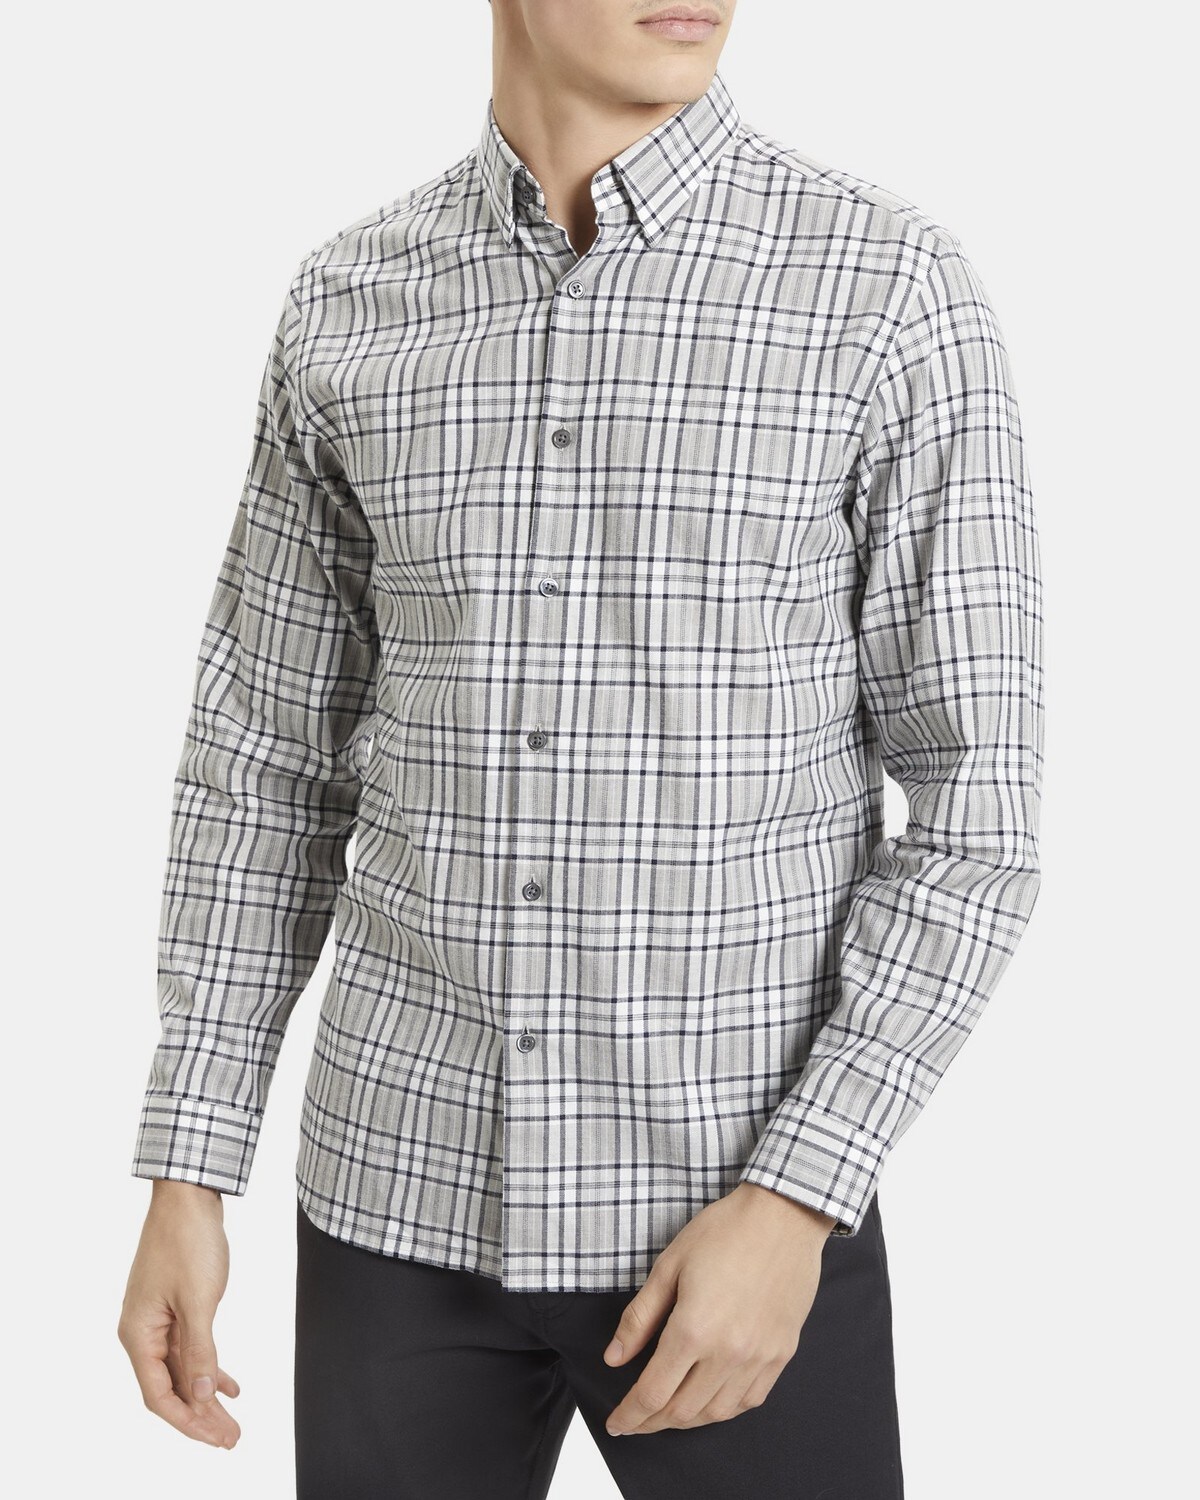 Standard-Fit Shirt in Checked Cotton